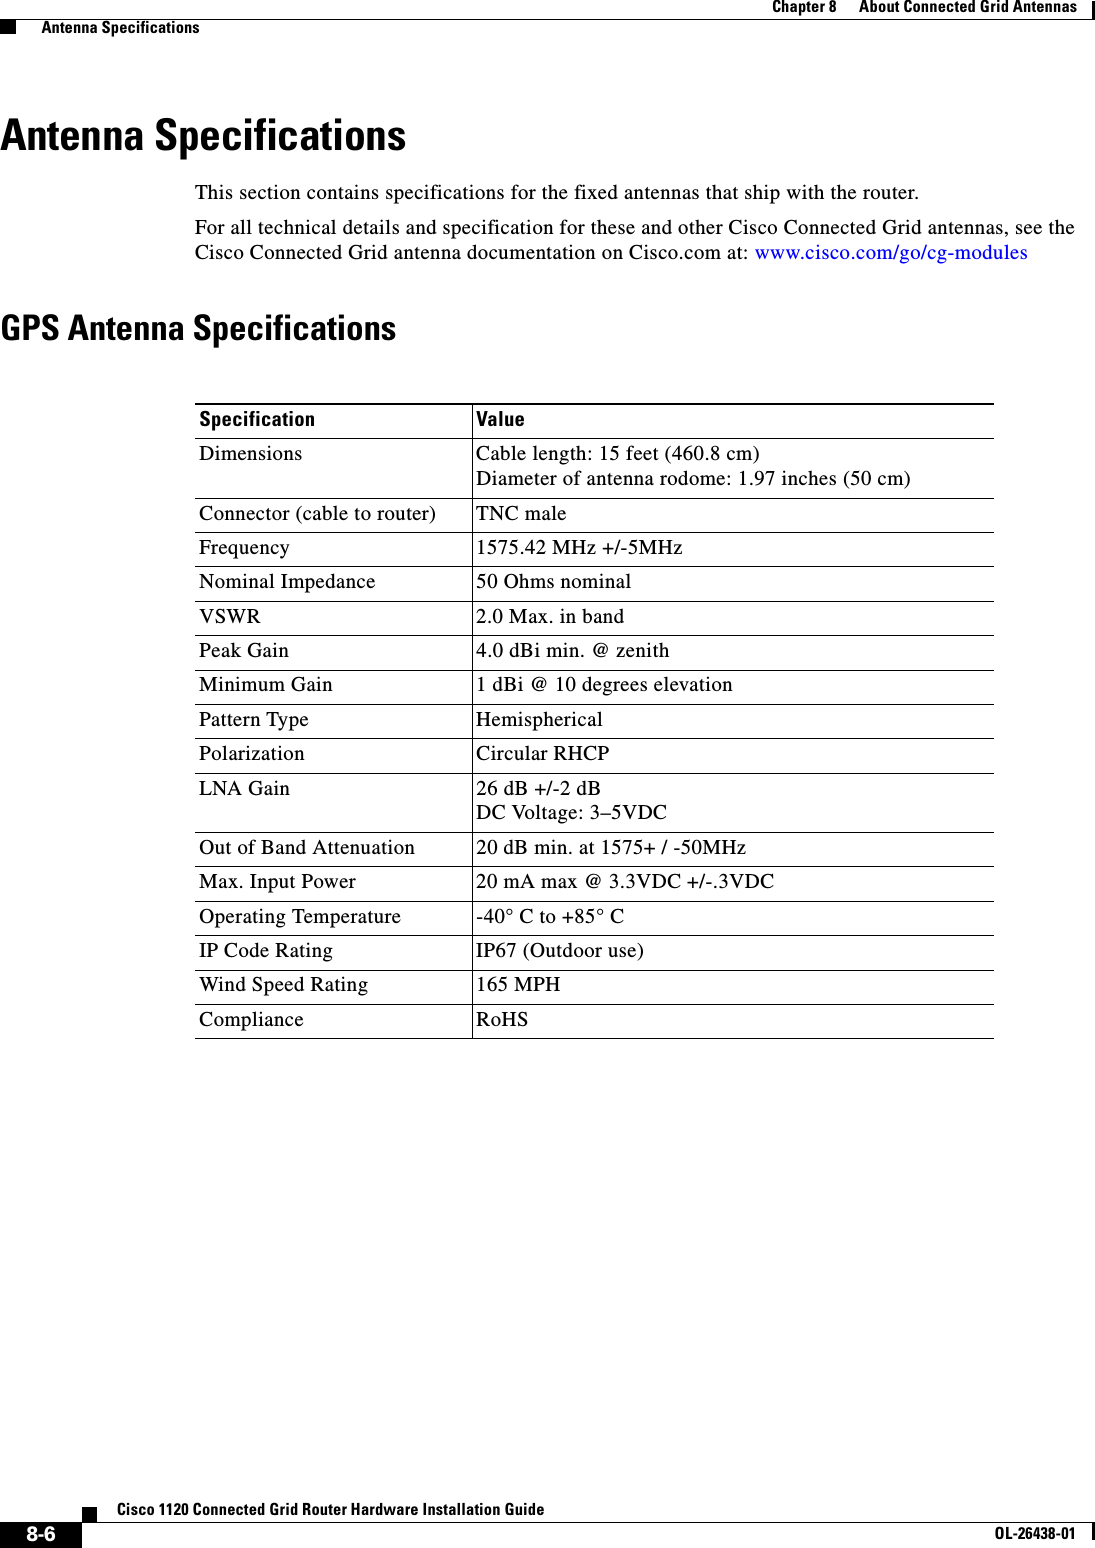  8-6Cisco 1120 Connected Grid Router Hardware Installation GuideOL-26438-01Chapter 8      About Connected Grid Antennas  Antenna SpecificationsAntenna SpecificationsThis section contains specifications for the fixed antennas that ship with the router. For all technical details and specification for these and other Cisco Connected Grid antennas, see the Cisco Connected Grid antenna documentation on Cisco.com at: www.cisco.com/go/cg-modulesGPS Antenna SpecificationsSpecification ValueDimensions Cable length: 15 feet (460.8 cm)Diameter of antenna rodome: 1.97 inches (50 cm)Connector (cable to router) TNC maleFrequency 1575.42 MHz +/-5MHzNominal Impedance 50 Ohms nominalVSWR 2.0 Max. in bandPeak Gain 4.0 dBi min. @ zenithMinimum Gain 1 dBi @ 10 degrees elevationPattern Type HemisphericalPolarization Circular RHCPLNA Gain 26 dB +/-2 dBDC Voltage: 3–5VDCOut of Band Attenuation 20 dB min. at 1575+ / -50MHzMax. Input Power 20 mA max @ 3.3VDC +/-.3VDCOperating Temperature -40° C to +85° CIP Code Rating IP67 (Outdoor use)Wind Speed Rating 165 MPHCompliance RoHS